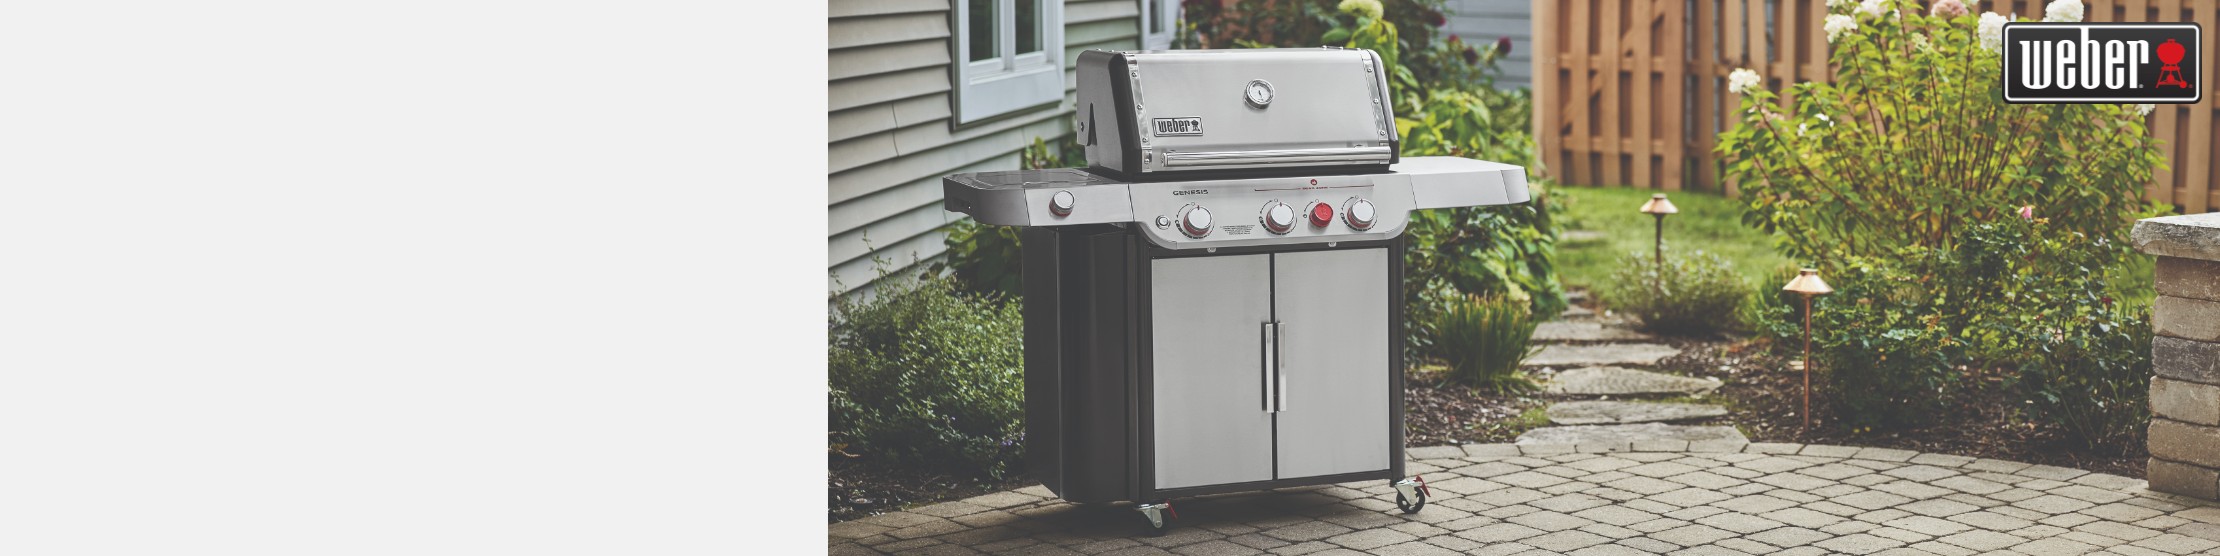 Free Delivery & Assembly**  on select Weber Grills    **Local delivery area only. Some exclusions apply.    SHOP NOW